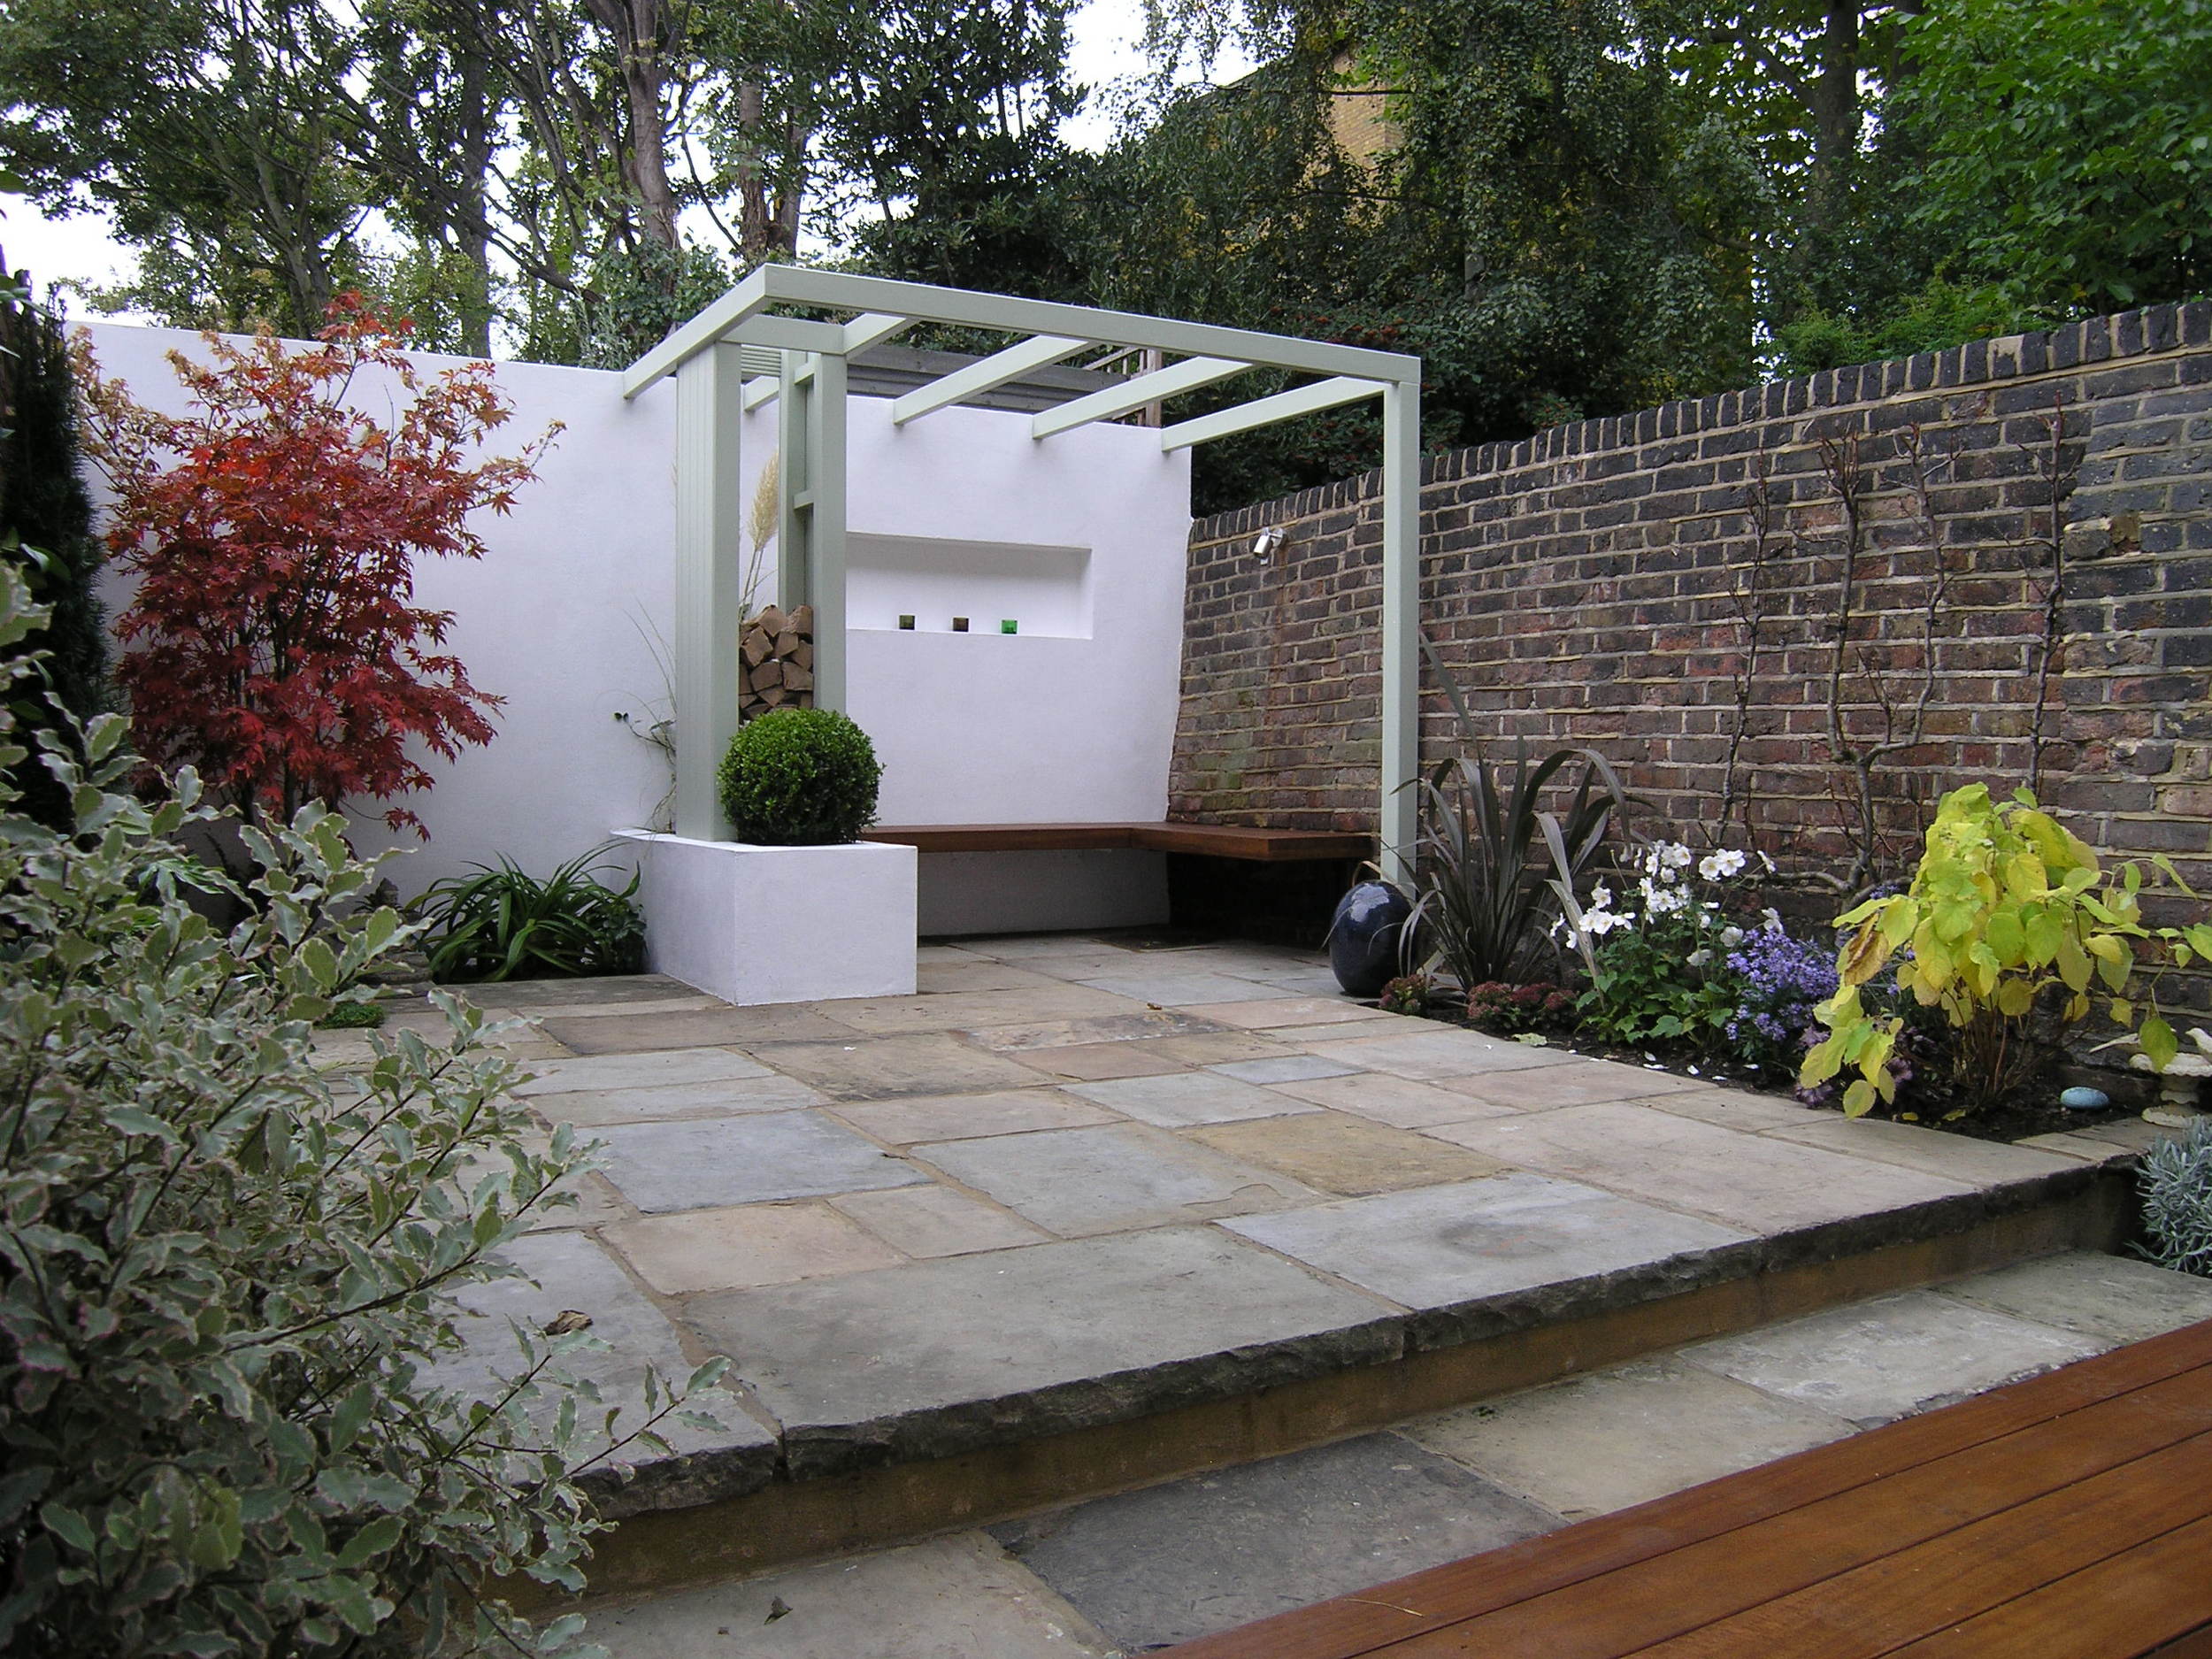 Low maintenance garden makeover in Islington with hardwood seating area